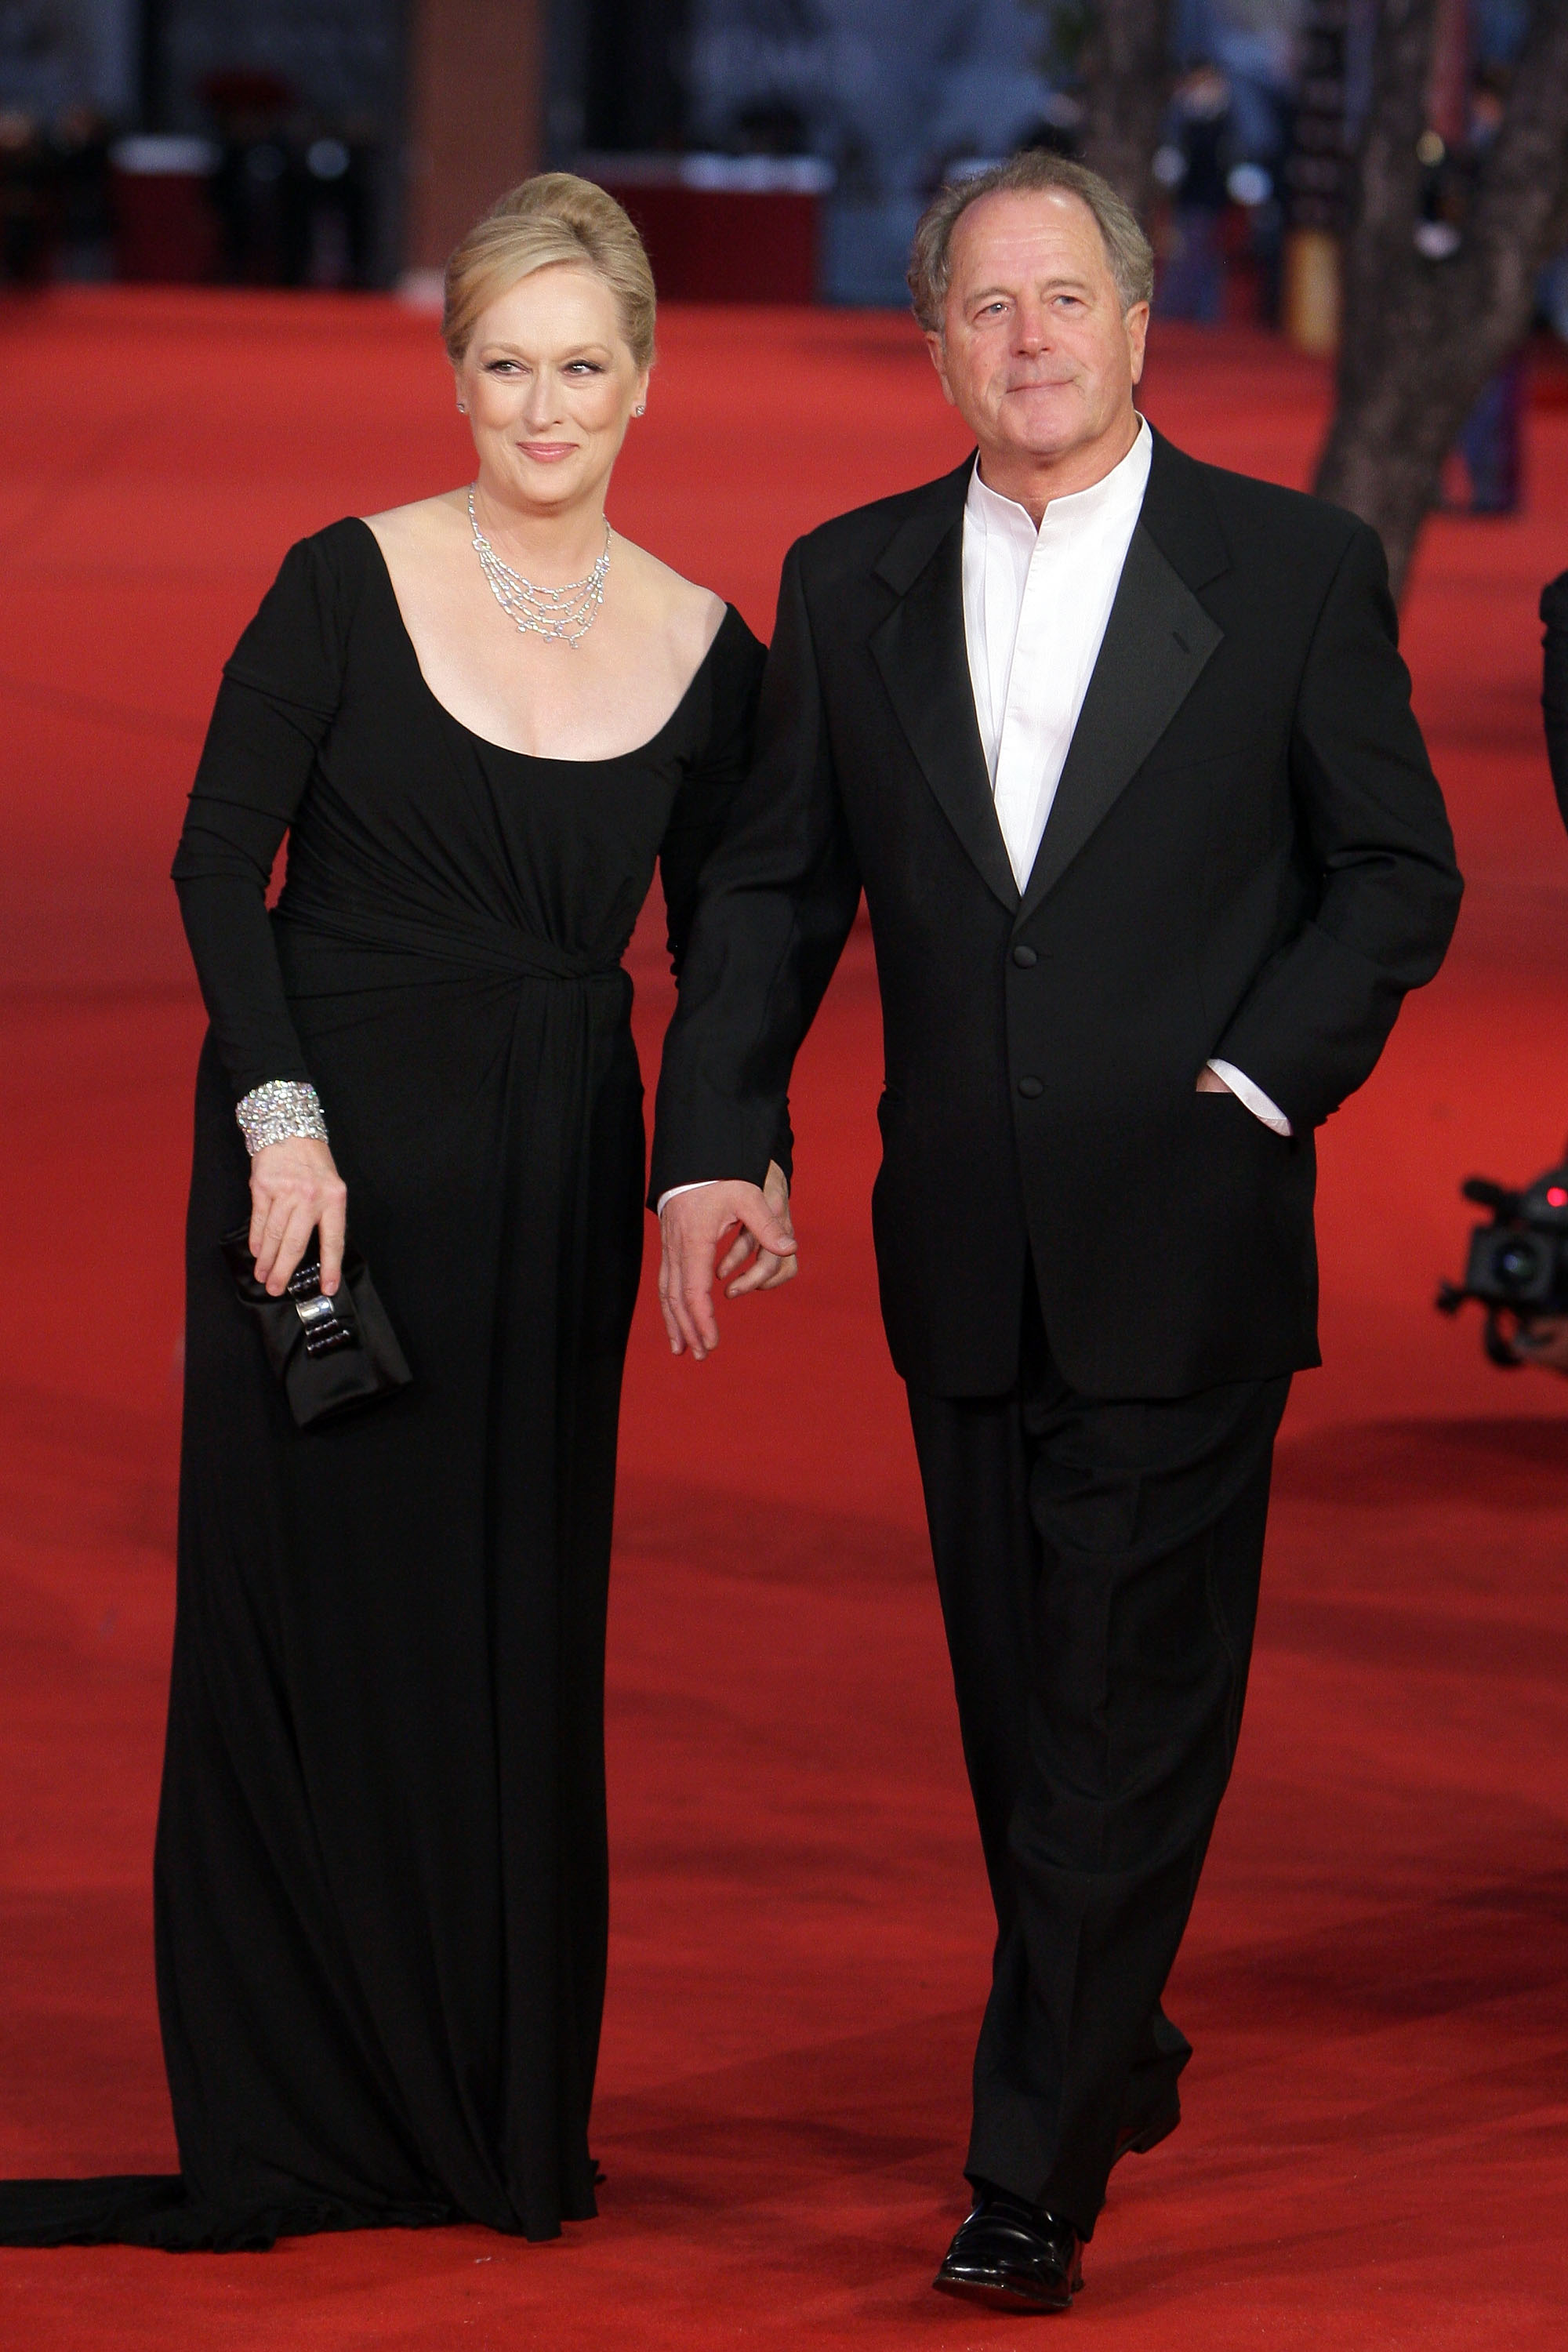 Meryl Streep and Don Gummer at the Official Awards Ceremony during Day 9 of the 4th International Rome Film Festival at the Auditorium Parco della Musica on October 23, 2009 in Rome, Italy. | Source: Getty Images